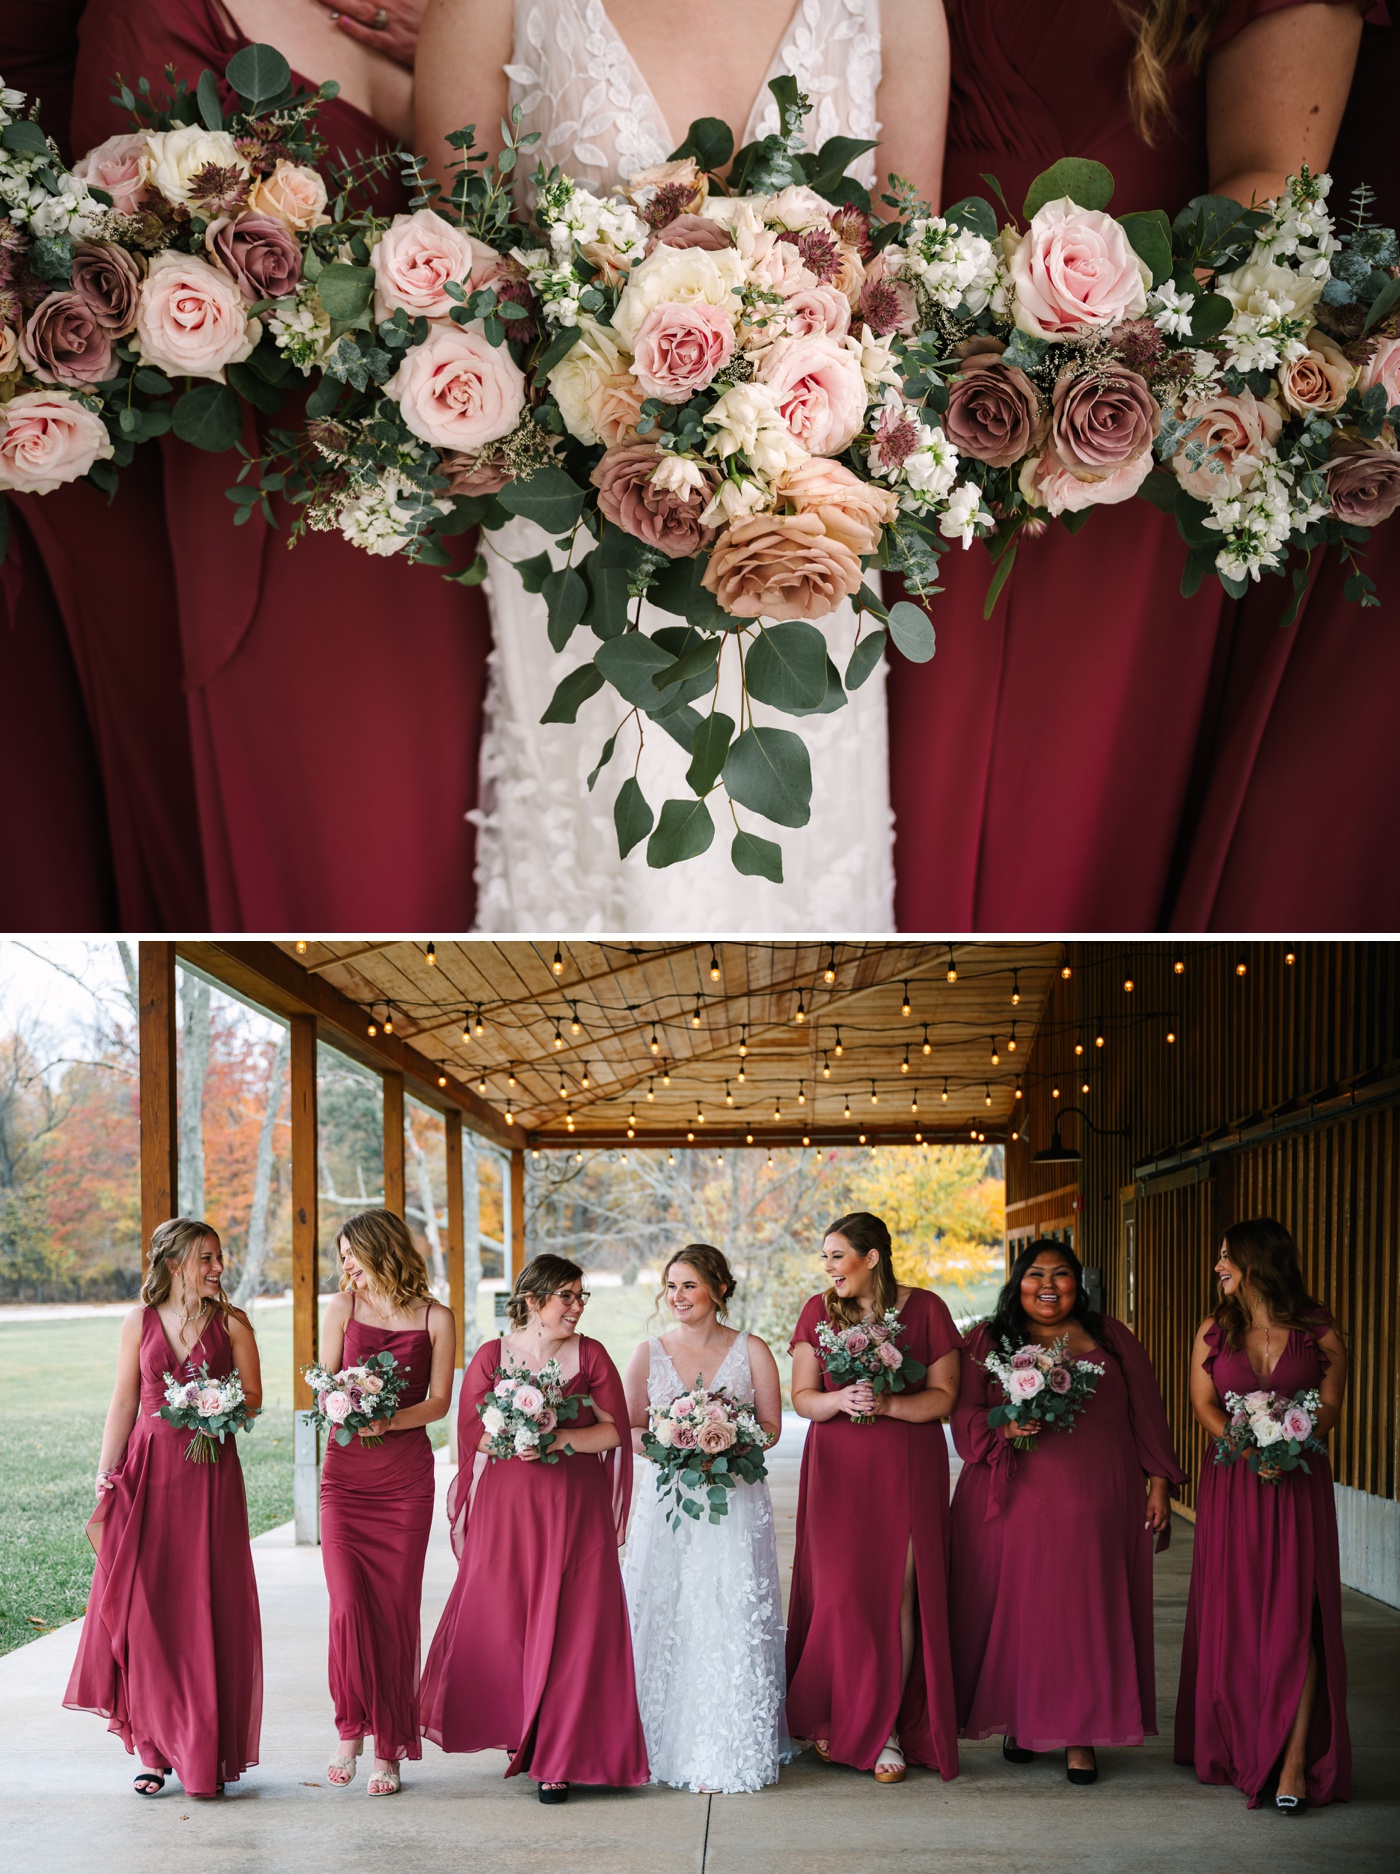 Ivory, blush, and mauve fall wedding bouquet filled with roses and astrantias